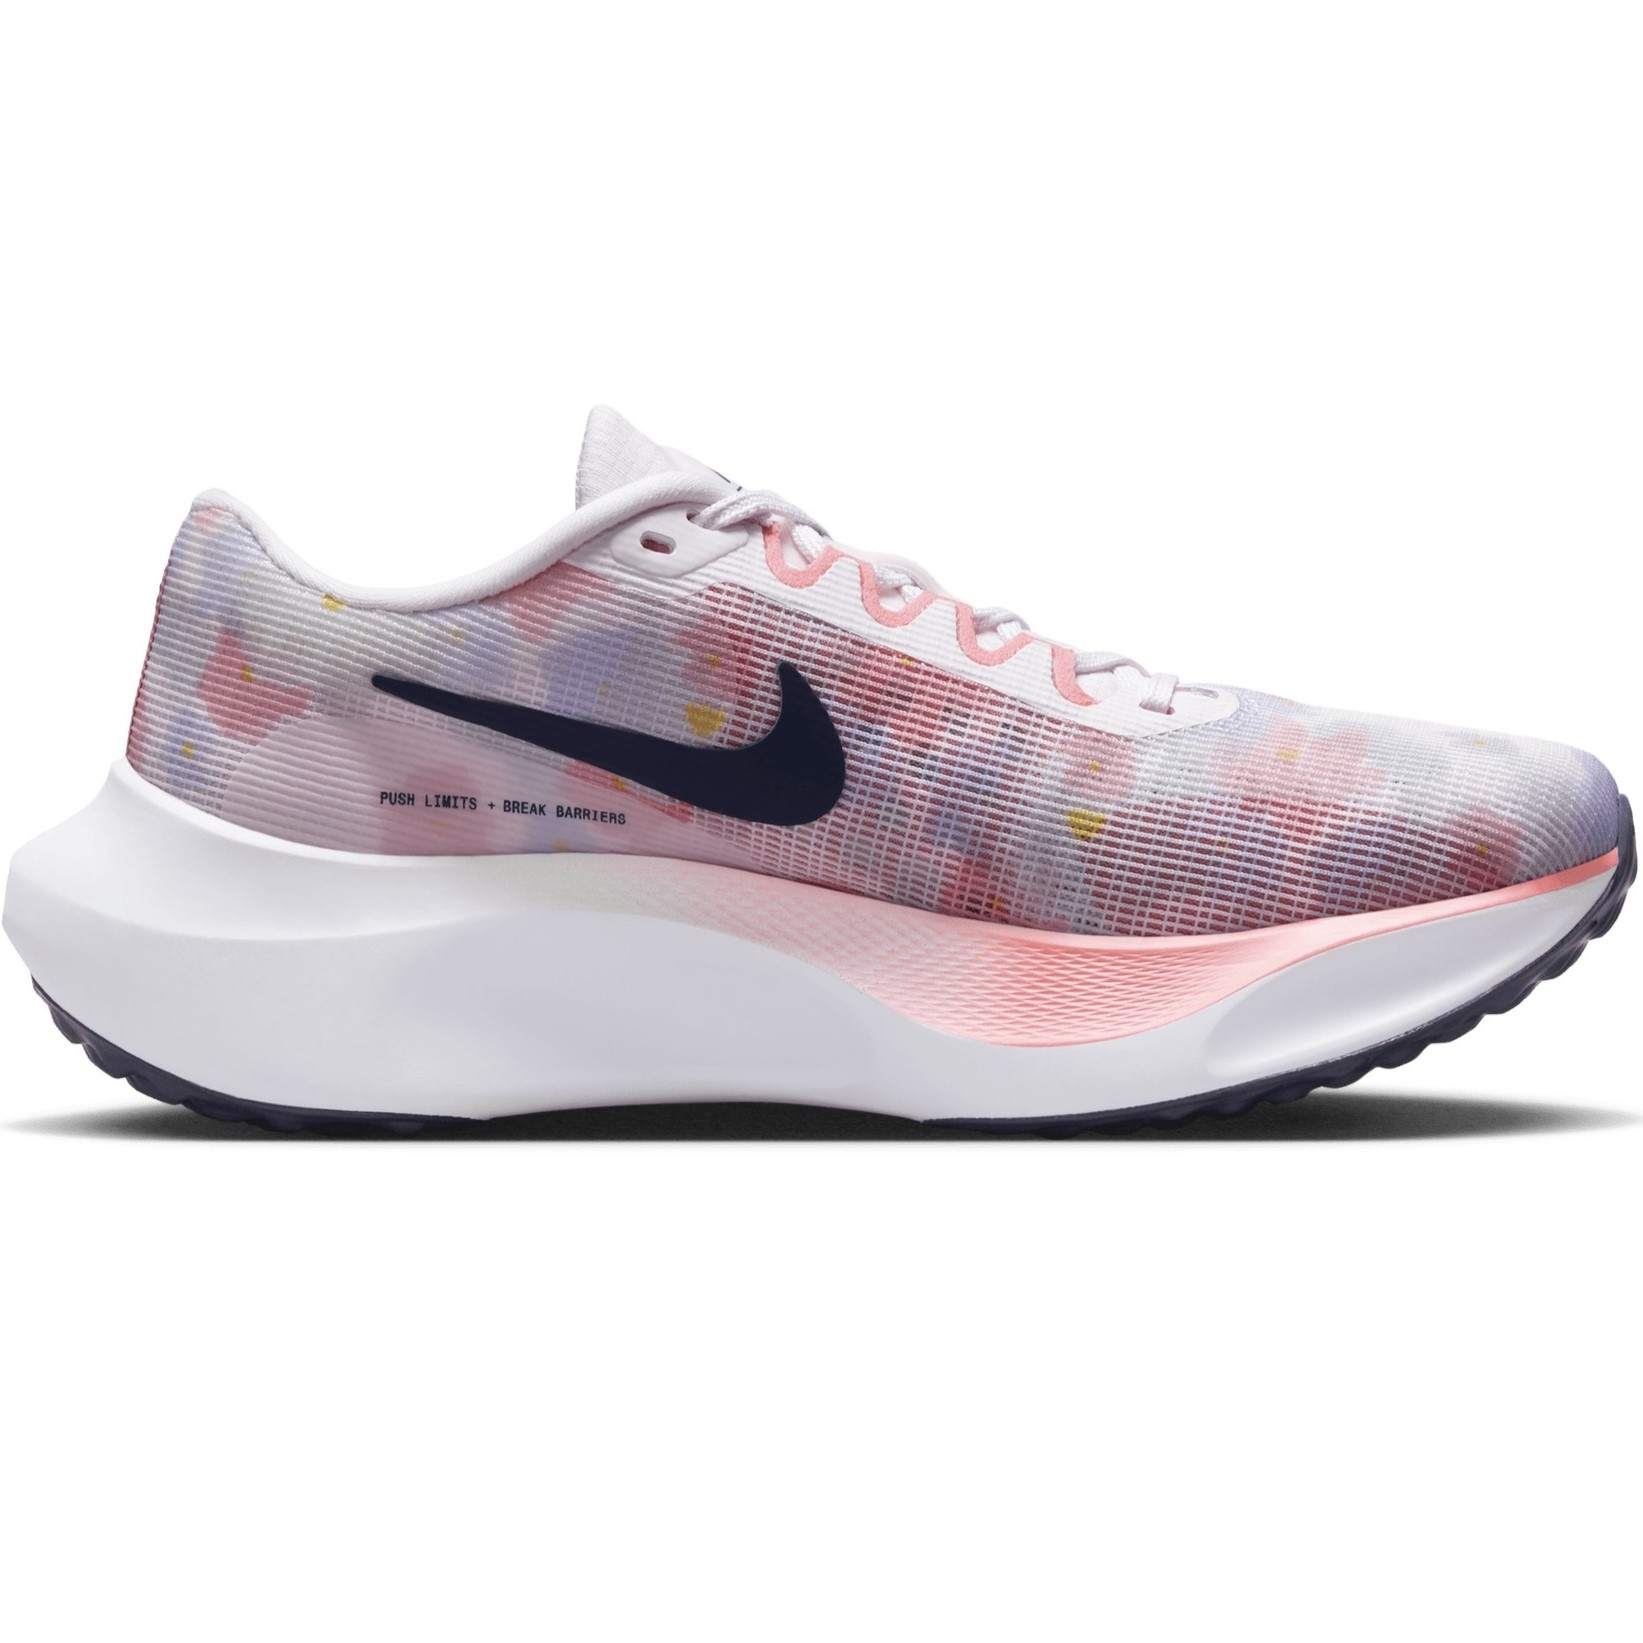 GIÀY NIKE NỮ ZOOM FLY 5 PREMIUM WOMEN ROAD RUNNING SHOES PEARL PINK DV7894-600 5